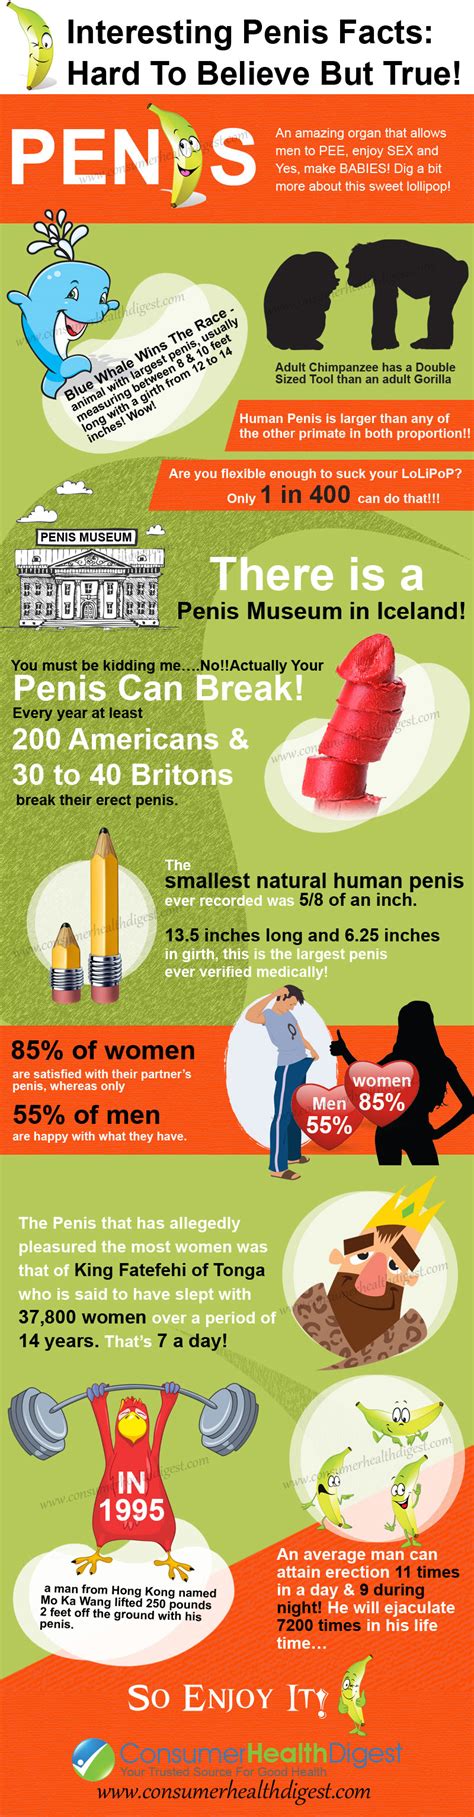 know the interesting penis facts which are 100 true